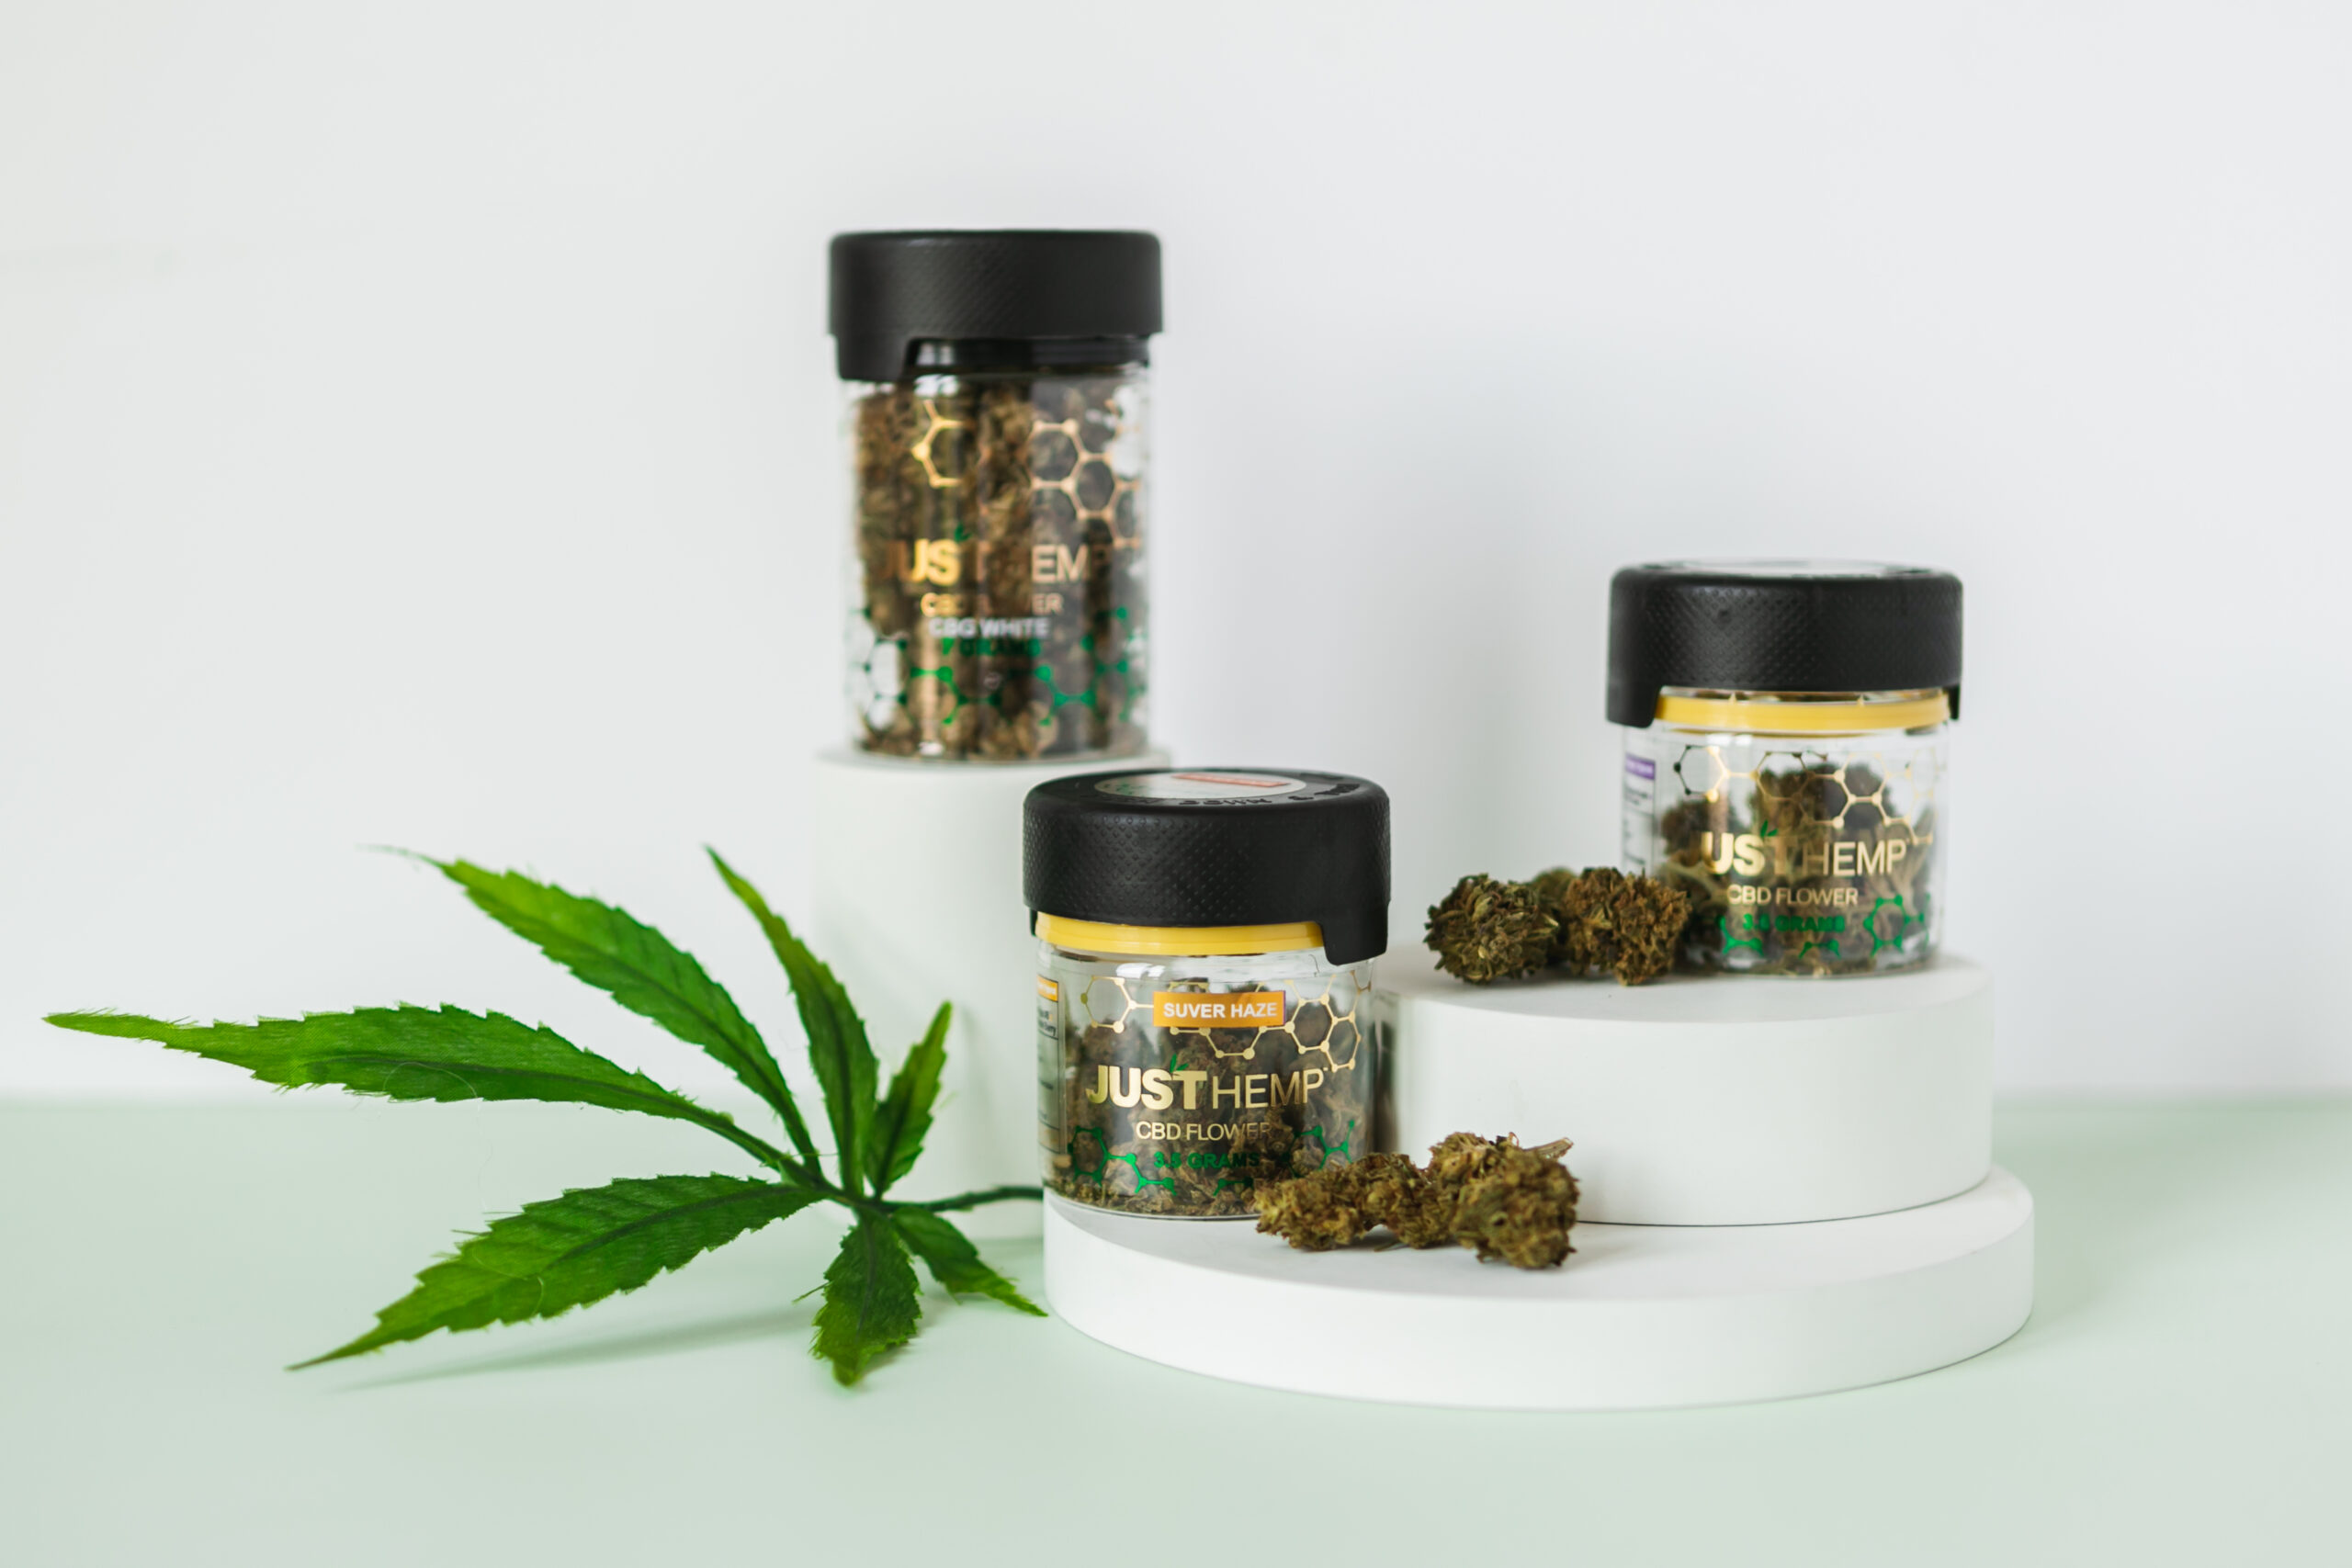 BEAUTY HEMP PRODUCTS; THE NEXT BIG INDUSTRY